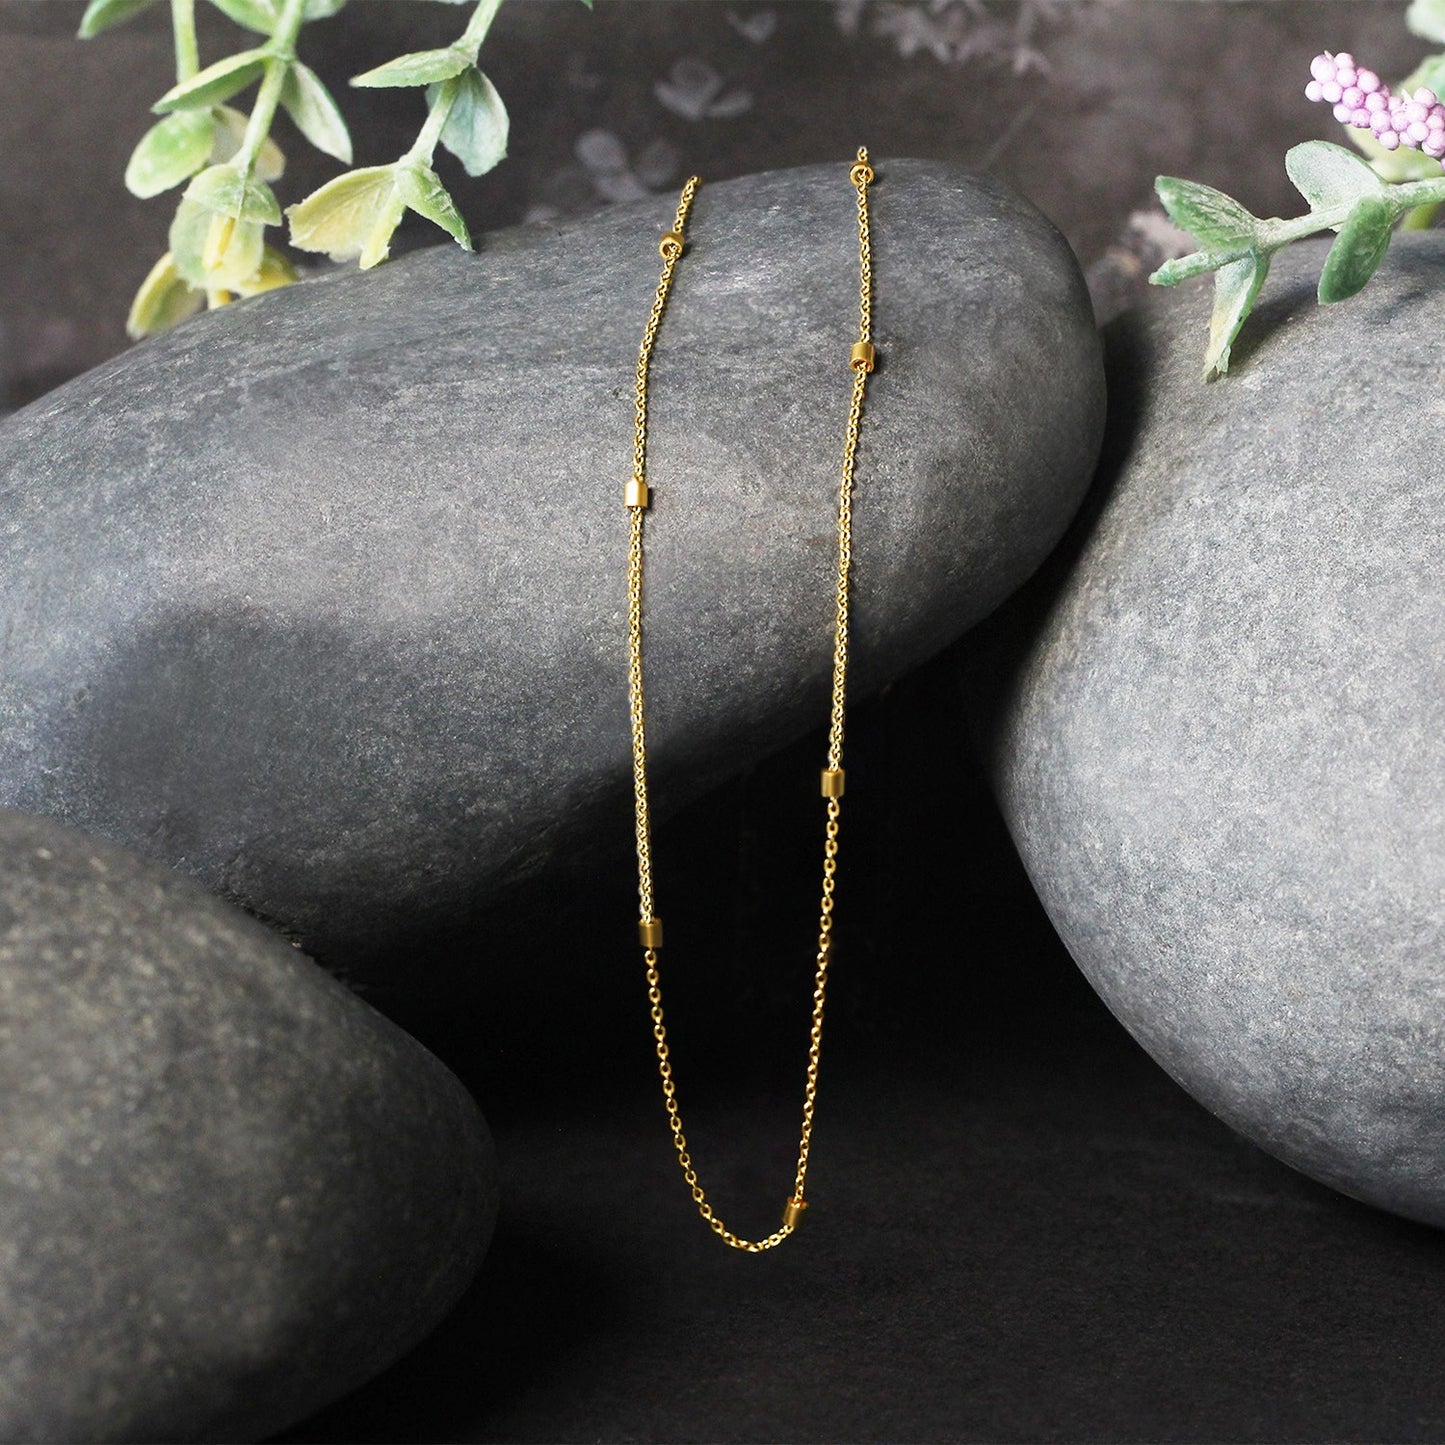 Bead Links Pendant Chain in 14k Yellow Gold (1.5mm)